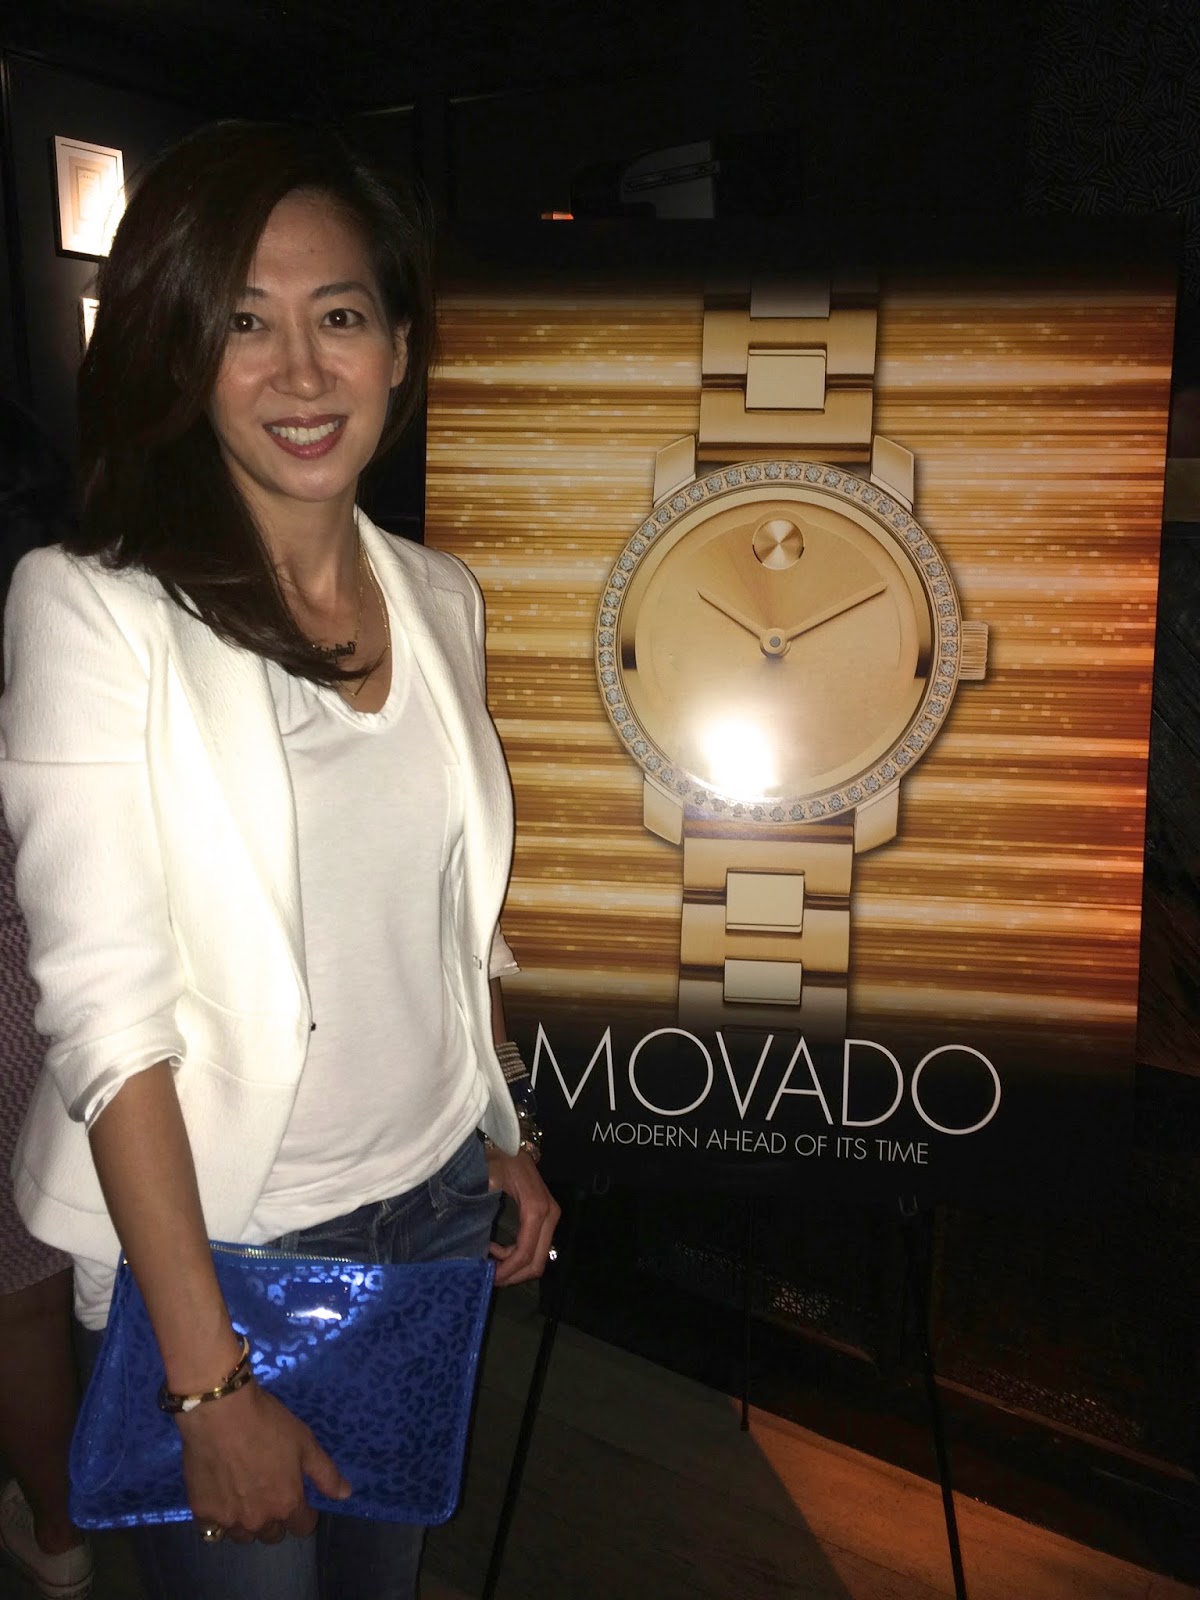 OOTD next to Movado signage